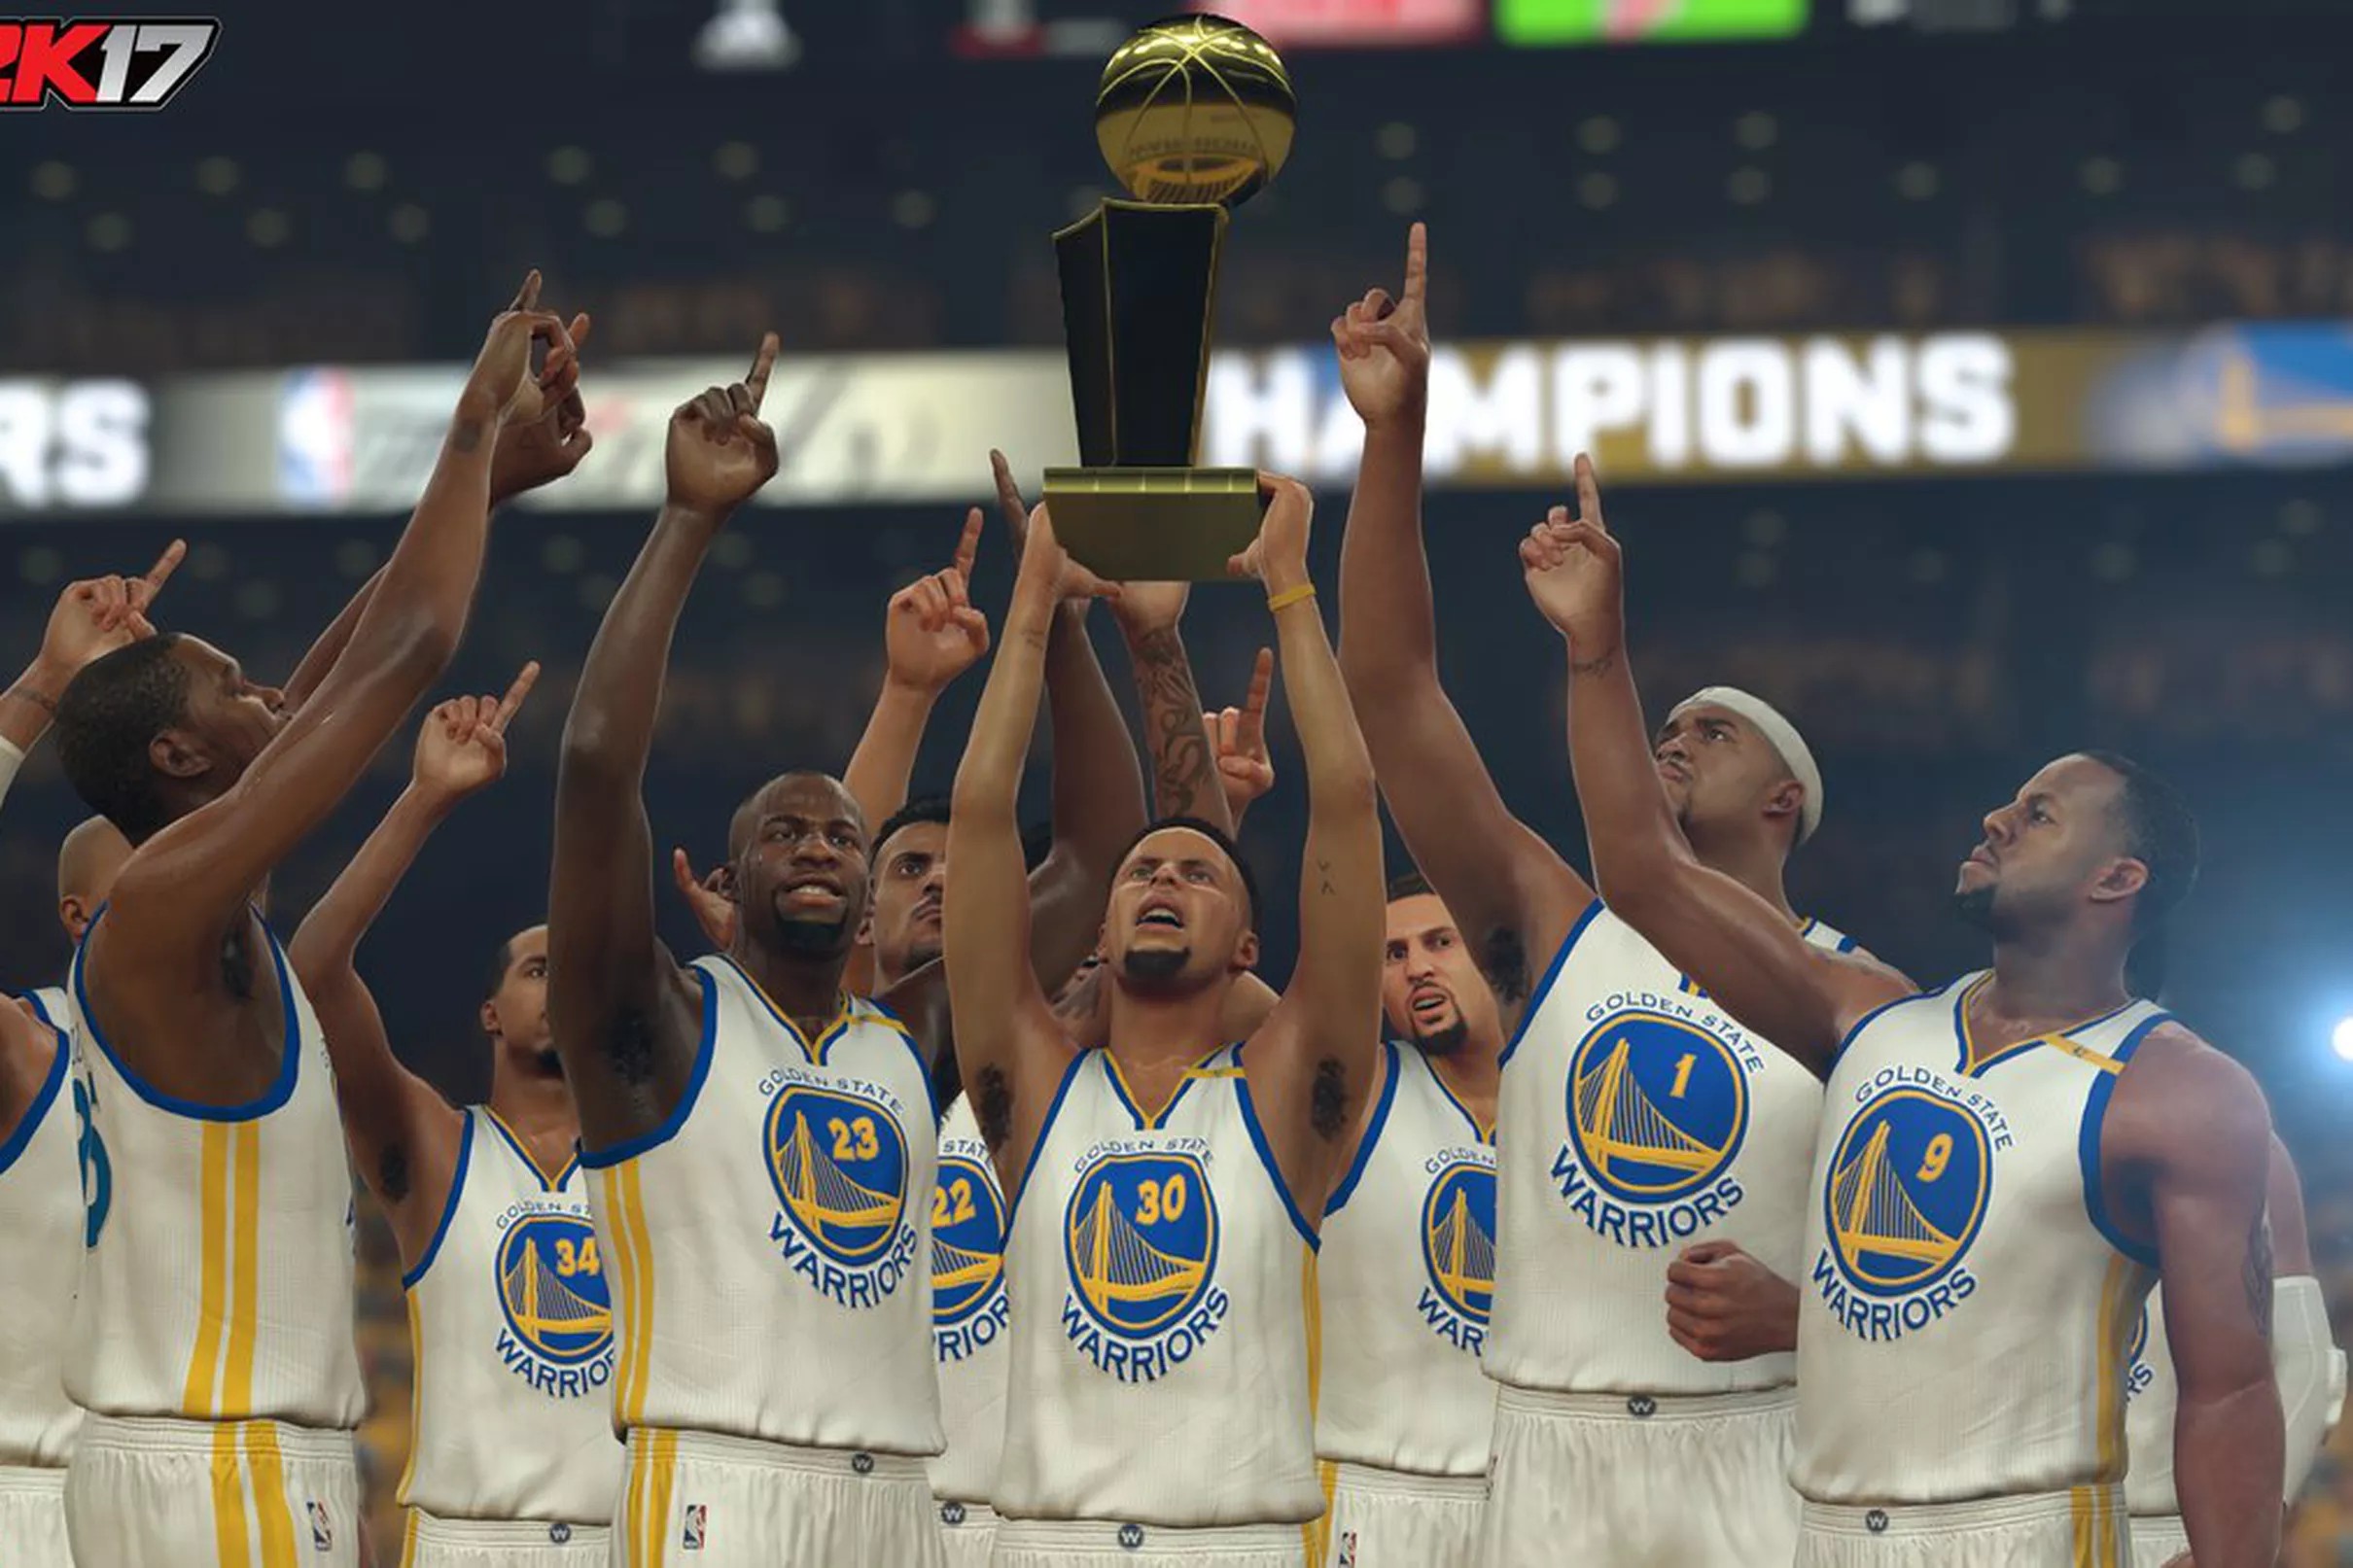 The AllTime Golden State Warriors team, according to 2K Sports